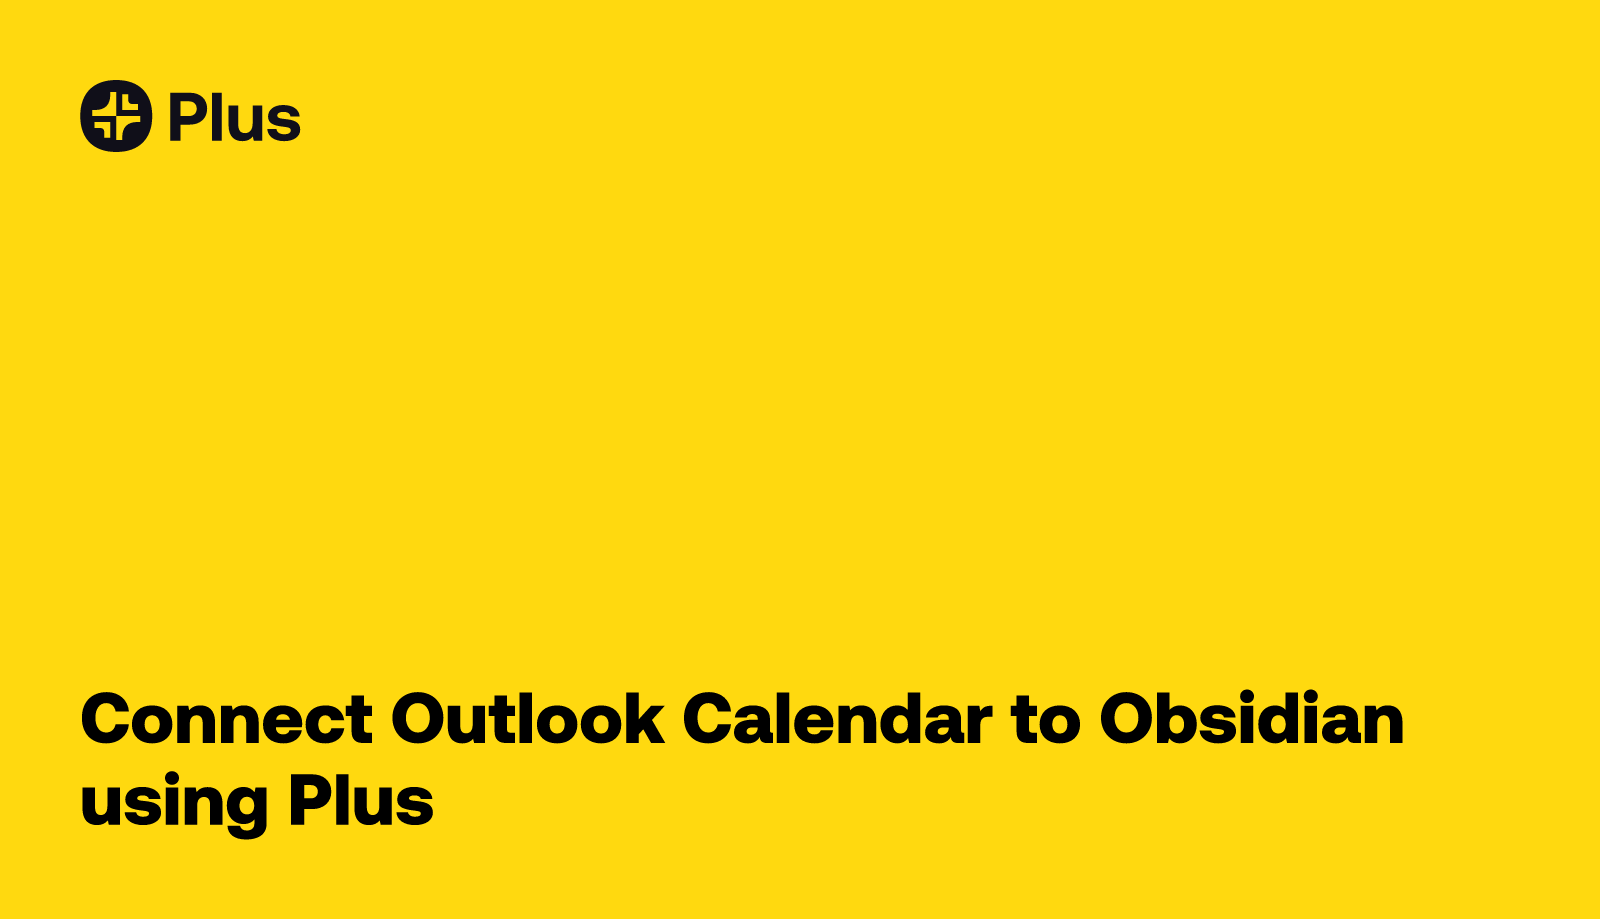 Outlook Calendar and Obsidian integration using Plus Plus